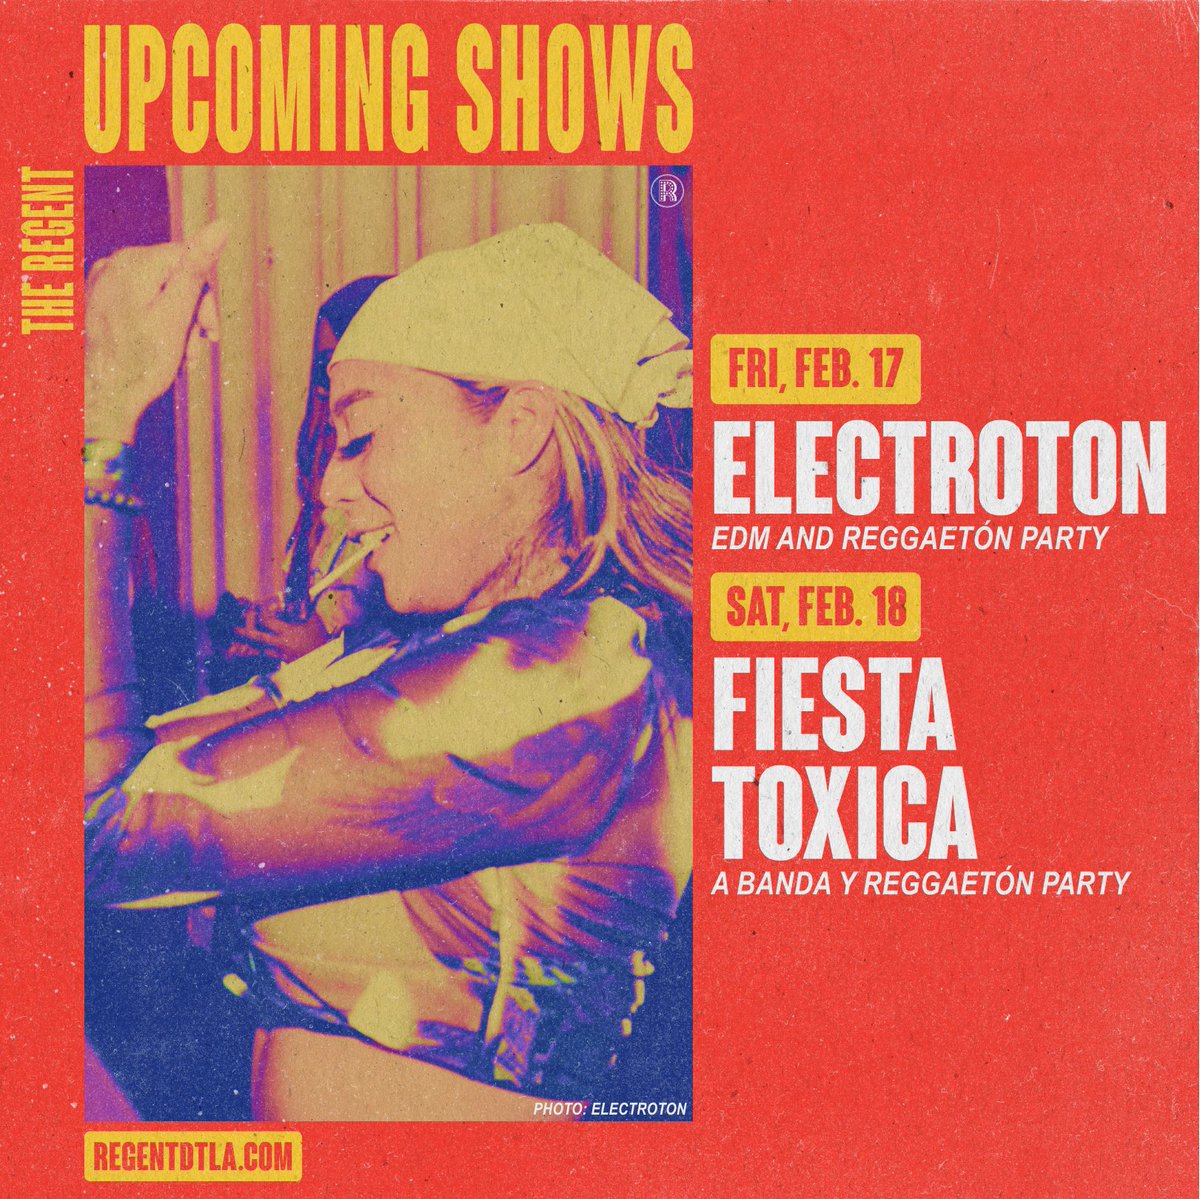 Happy Valentine’s Day, we’ve got a reggaetón takeover this week at The Regent! 🔥 Fri. 2/17 | Electroton EDM and reggaetón party 👾 Sat. 2/18 | Fiesta Toxica A banda y reggaetón Party 🤠 Tix and more info available at regentdtla.com 🎫